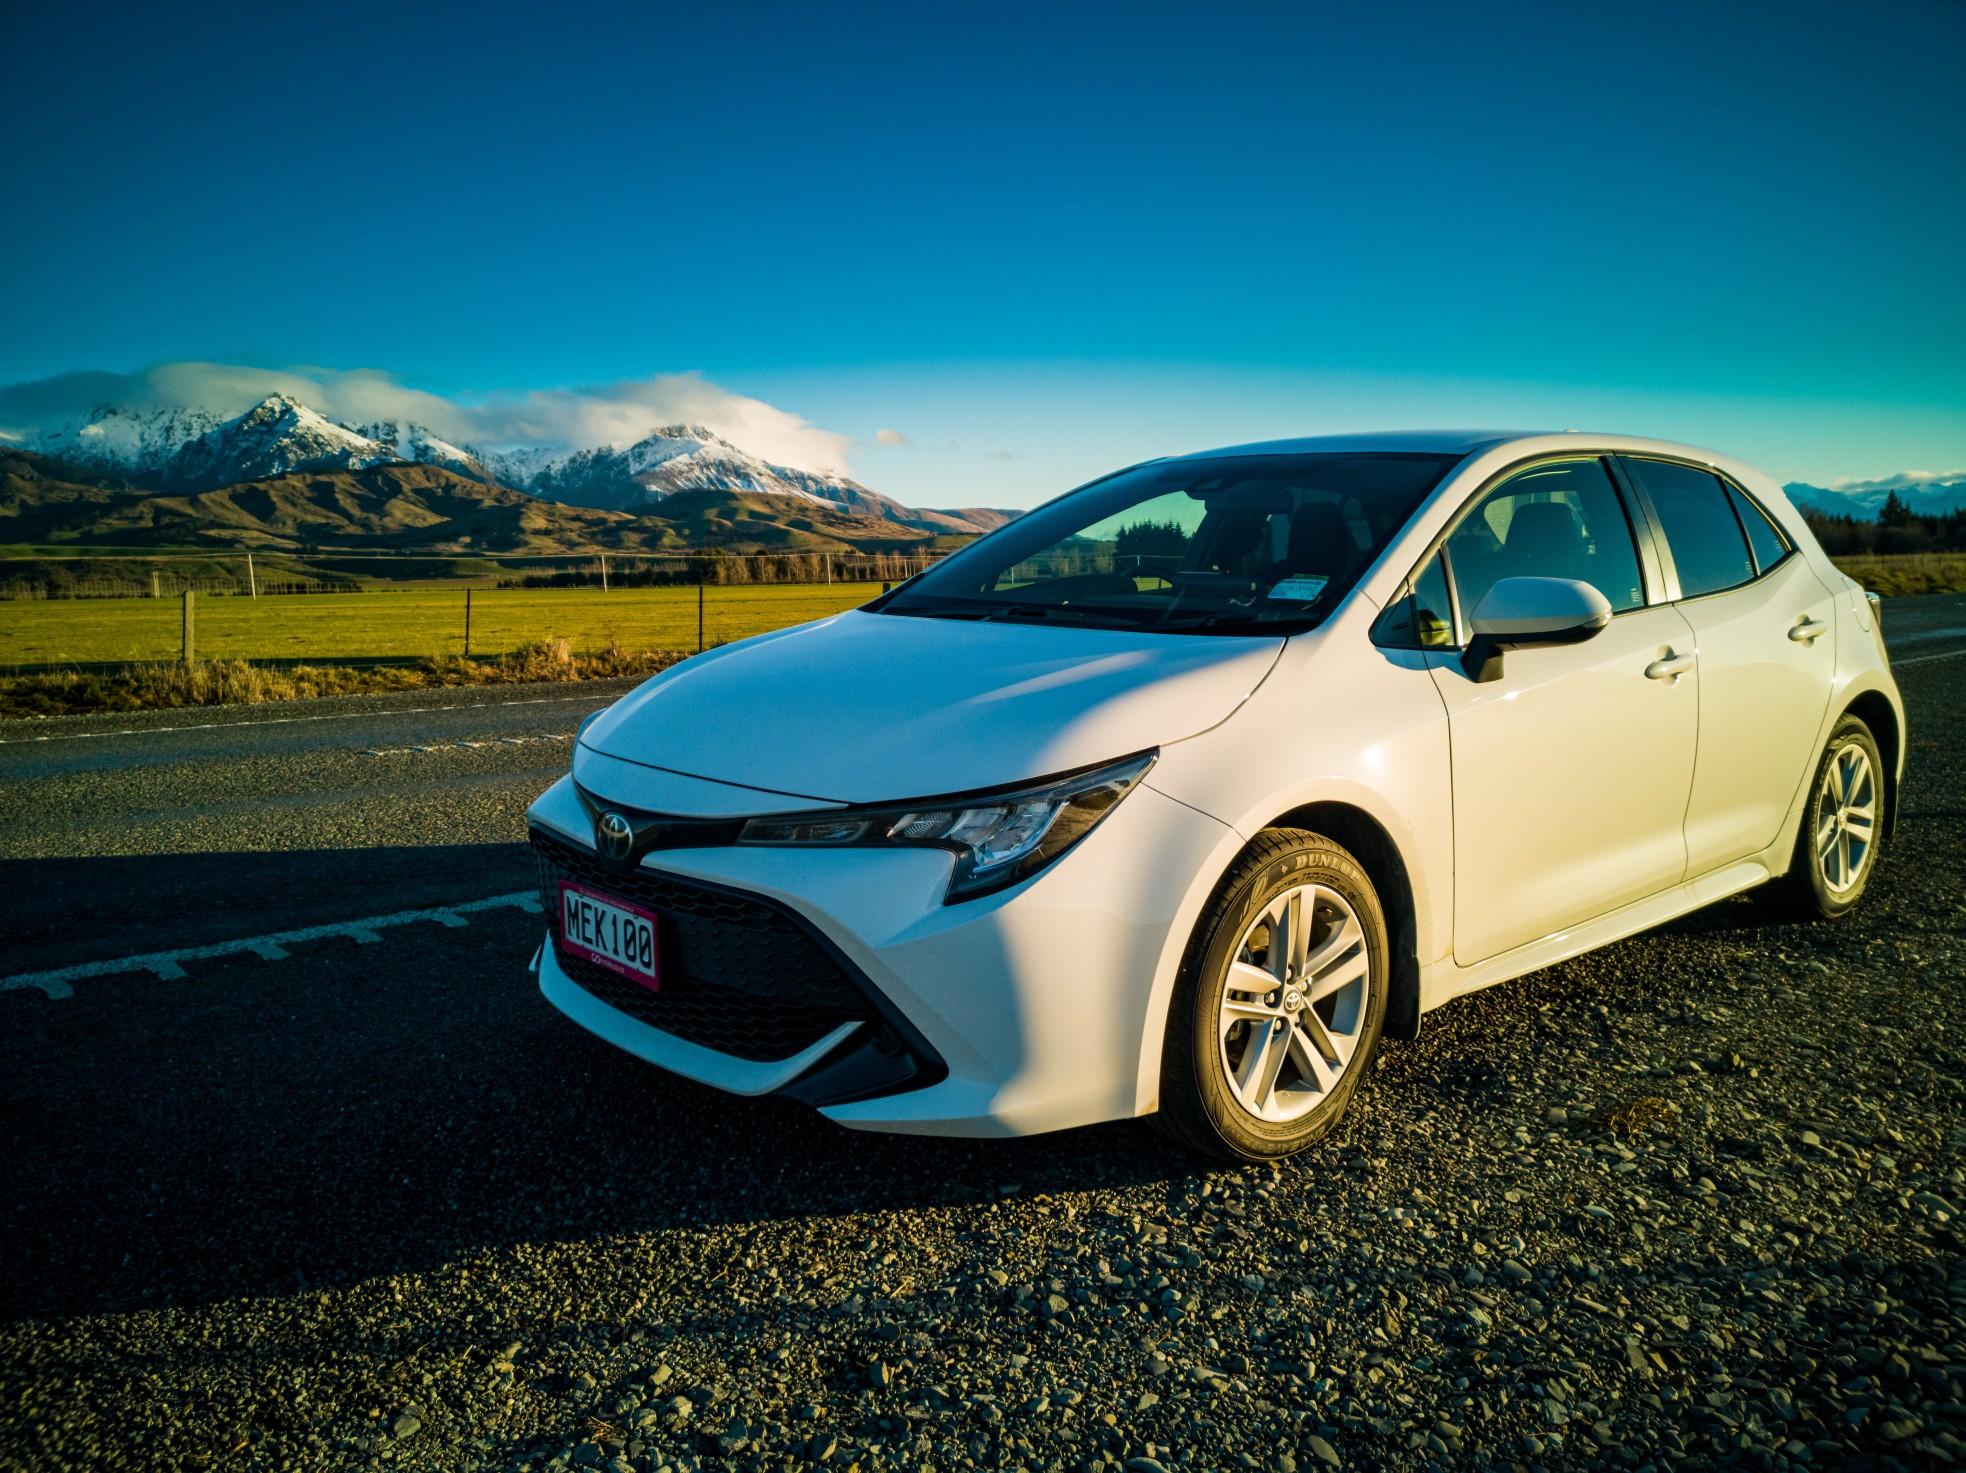 The Toyota Camry has dominated car sales in the U.S. for years.